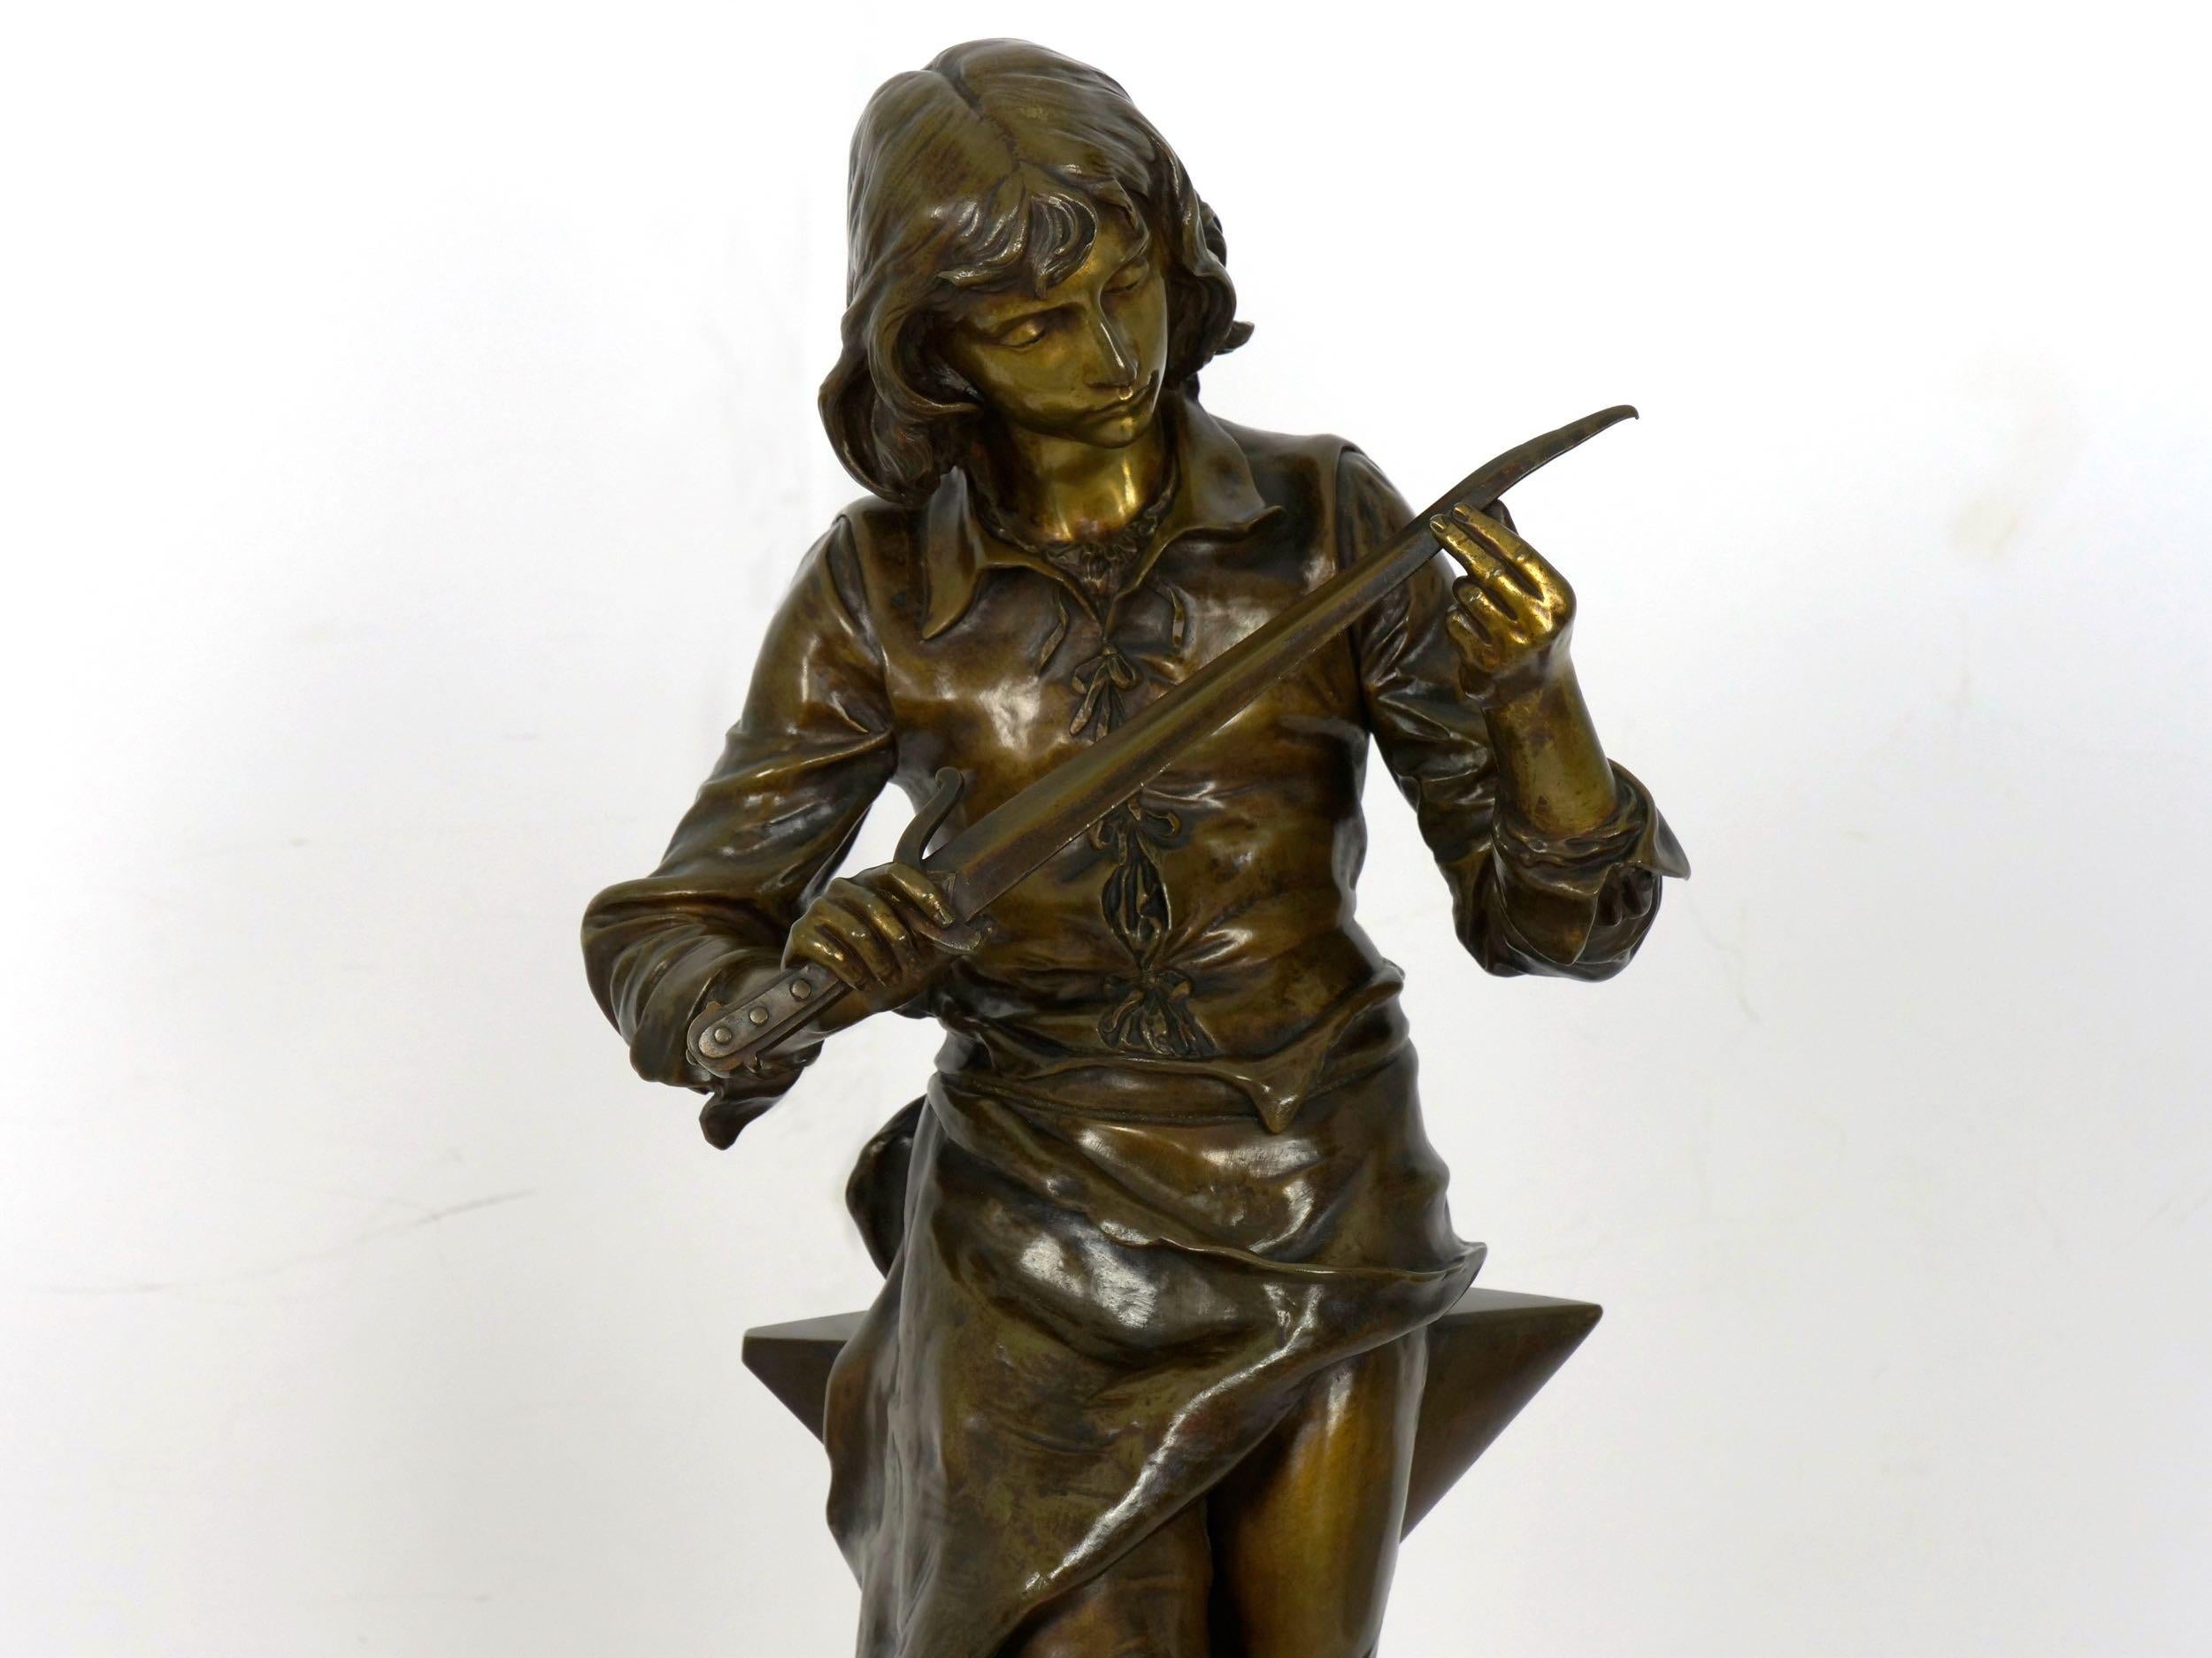 “A Young Bladesmith” French Antique Bronze Sculpture by Adrien-Étienne Gaudez 1